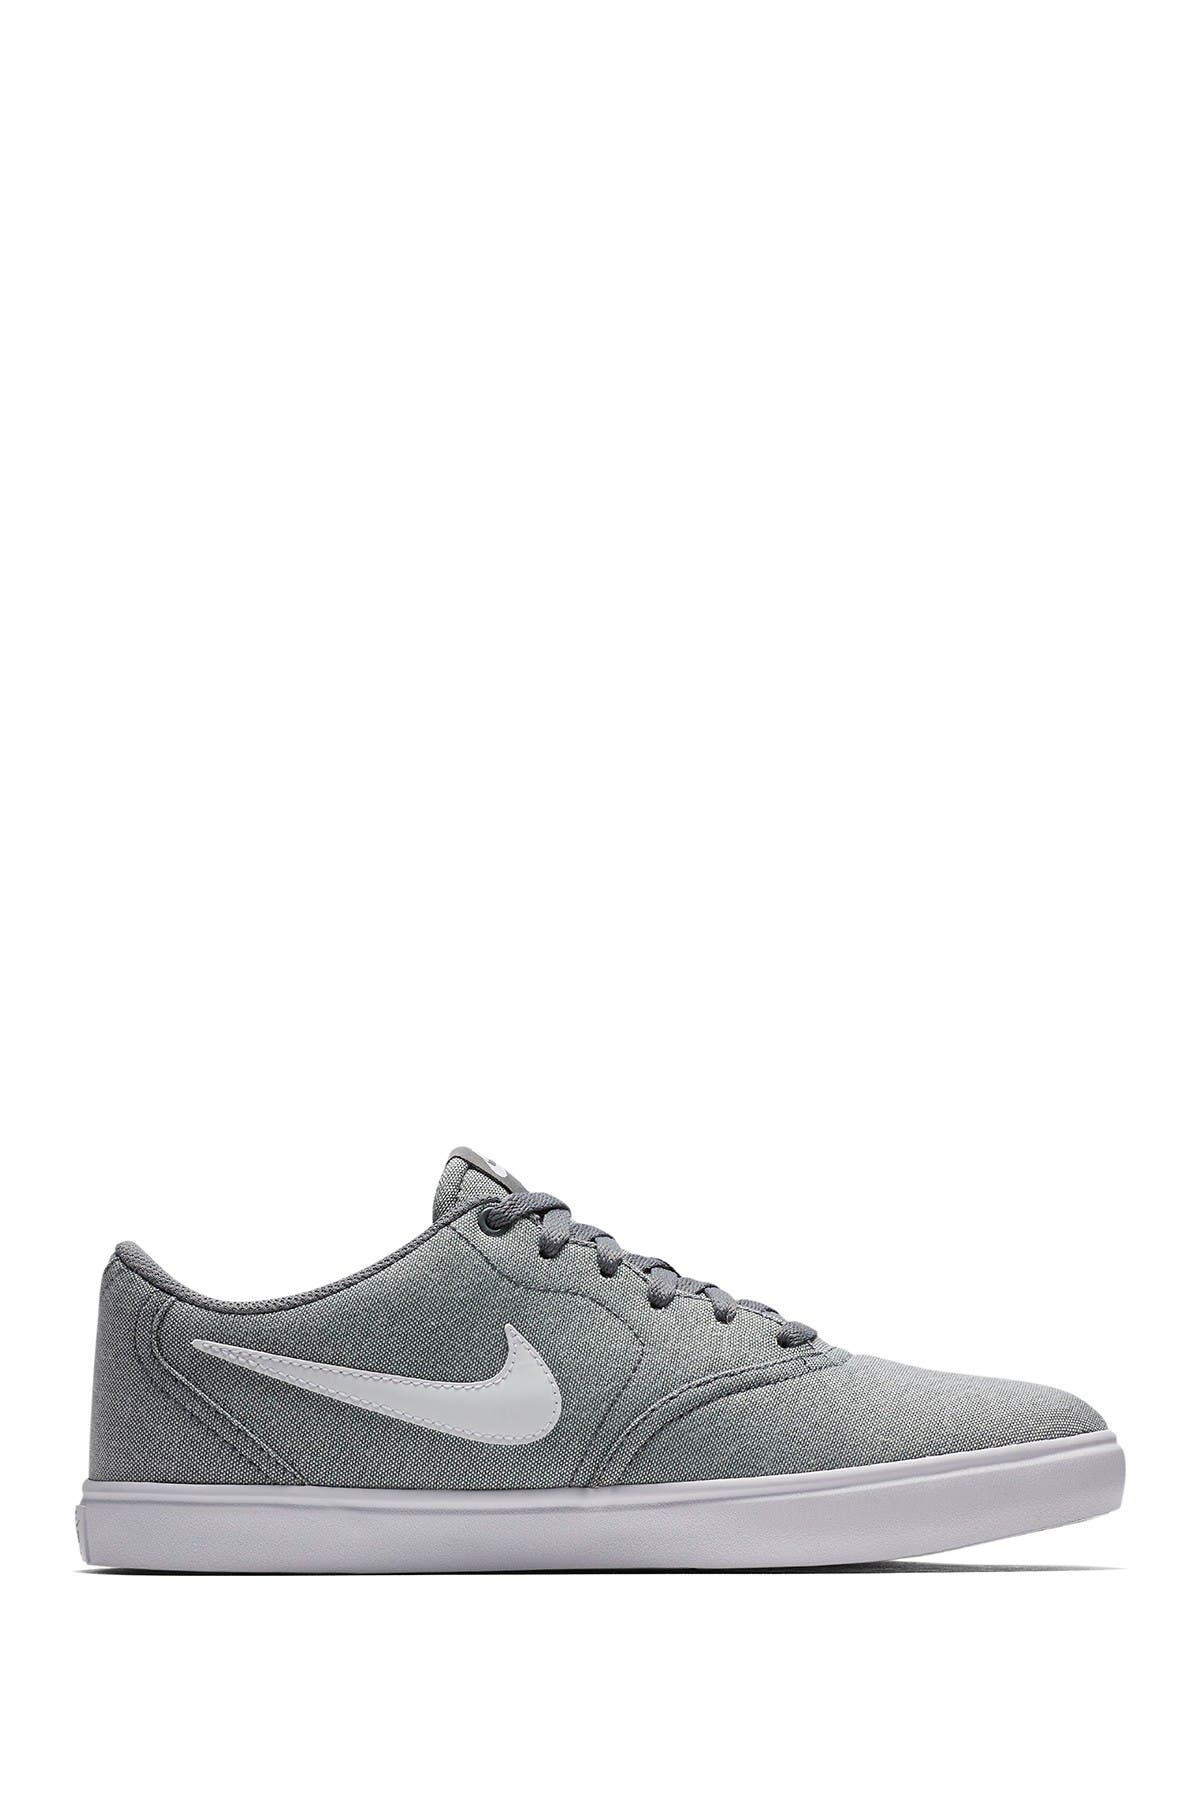 nike solar canvas sneakers